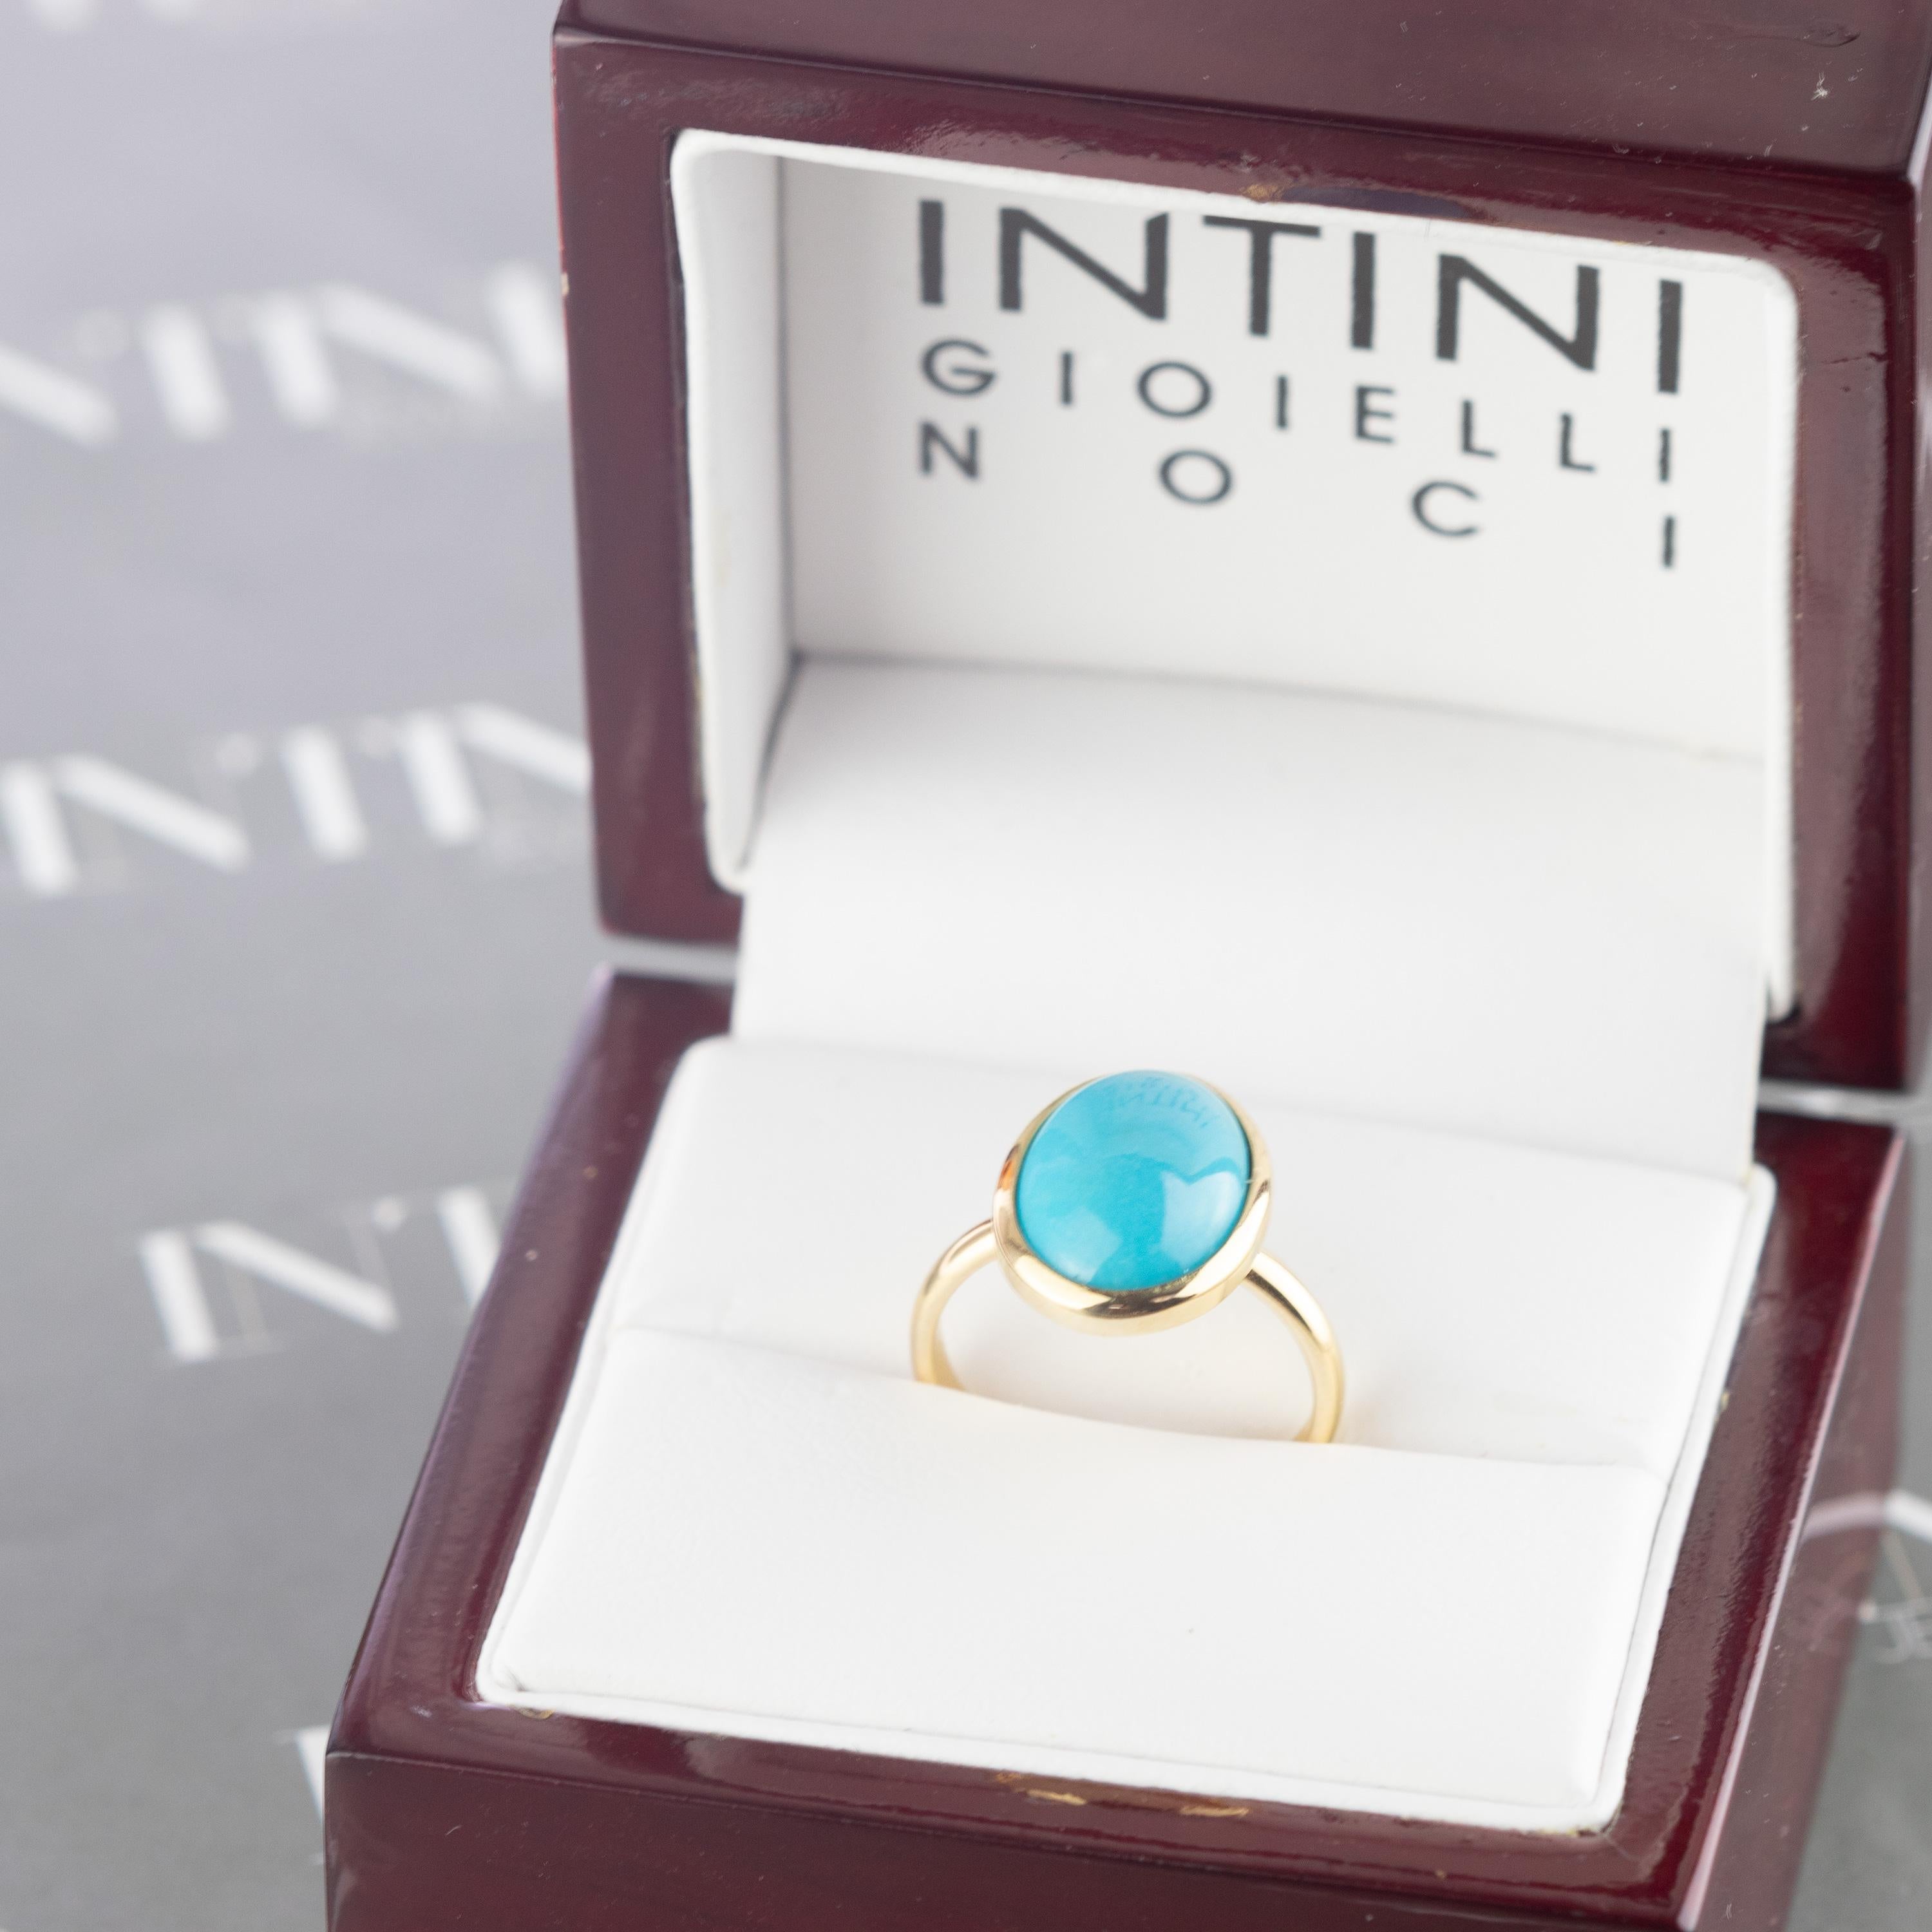 Magnificent ring with an exceptional art work, outstanding display of color and Italian craftsmanship designed by Intini Jewels. This unique ring has a natural oval turquoise over a 18 karat yellow gold cocktail design.
 
This ring represents the